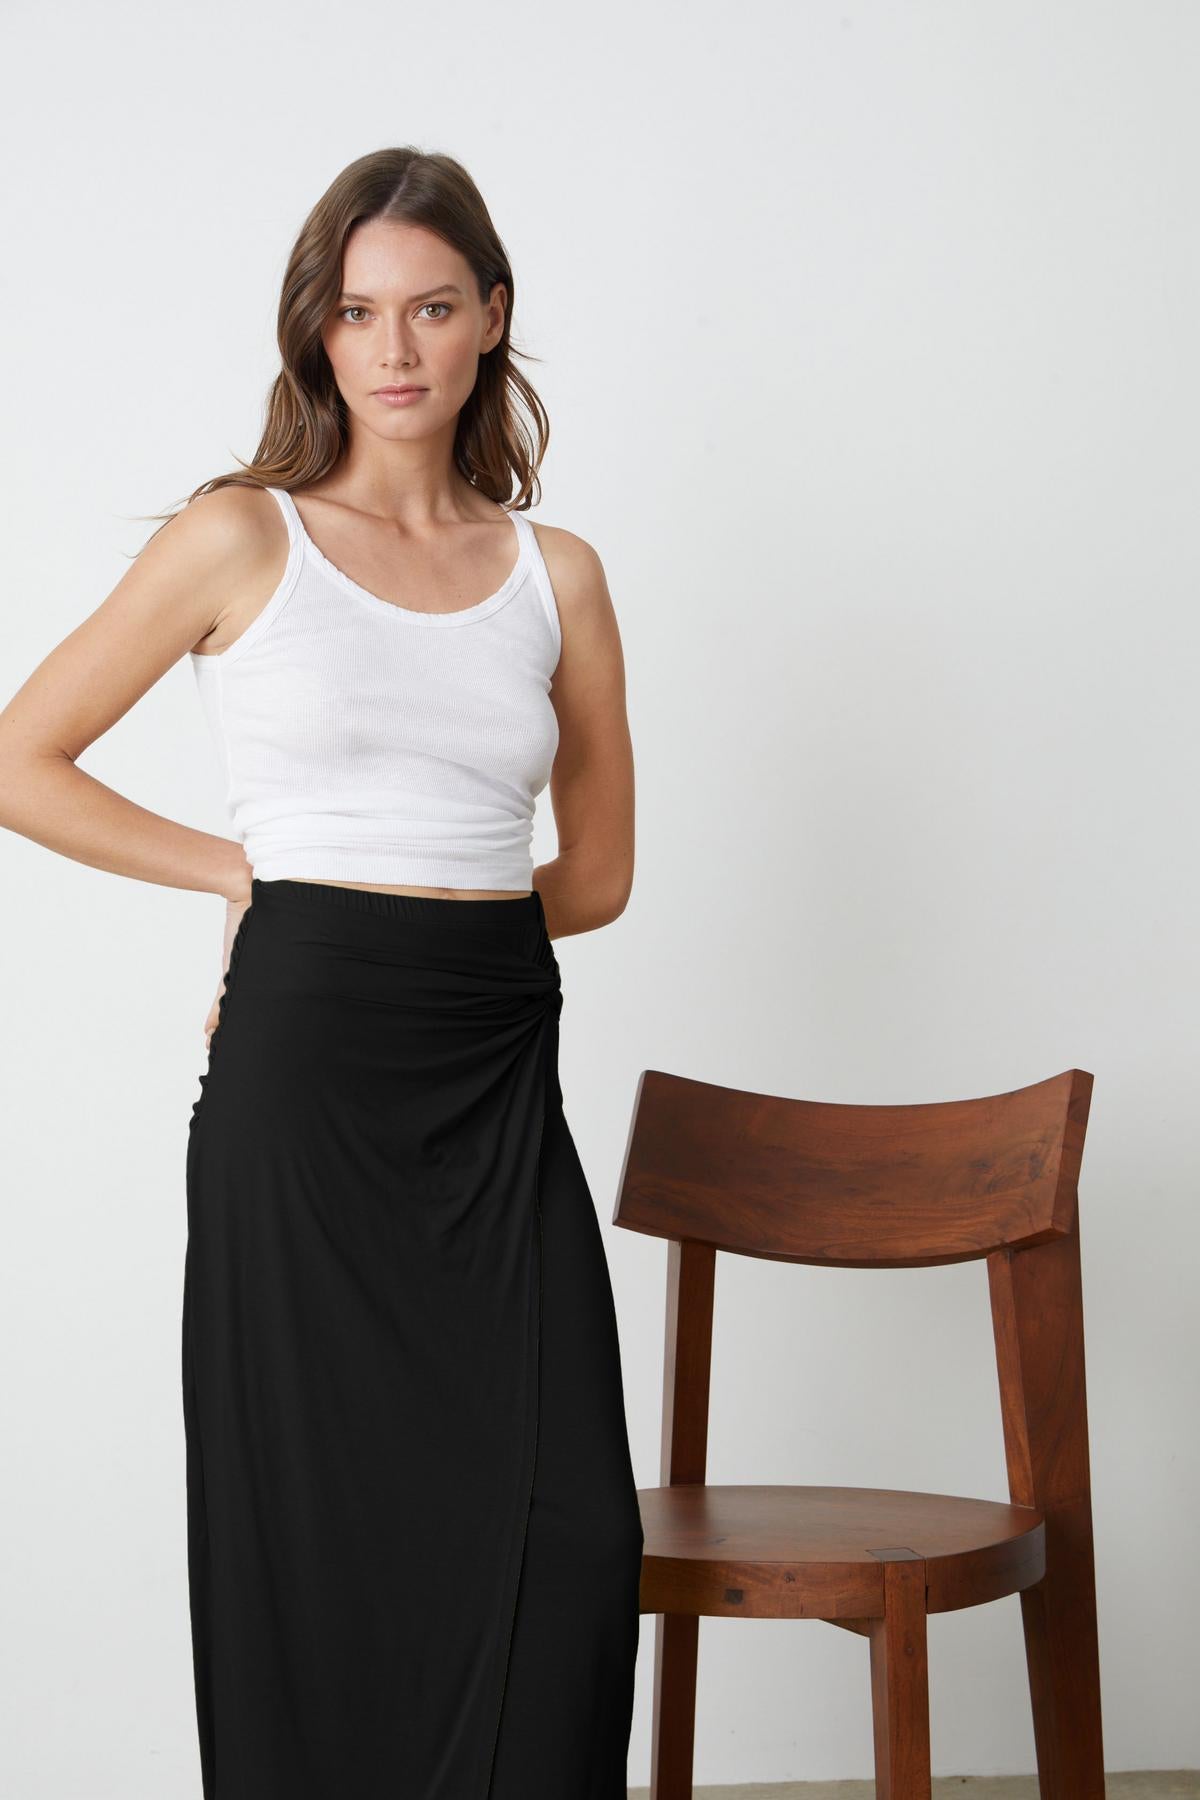 A person wearing a SHAE TWIST FRONT SKIRT by Velvet by Graham & Spencer and white top.-35211099832513